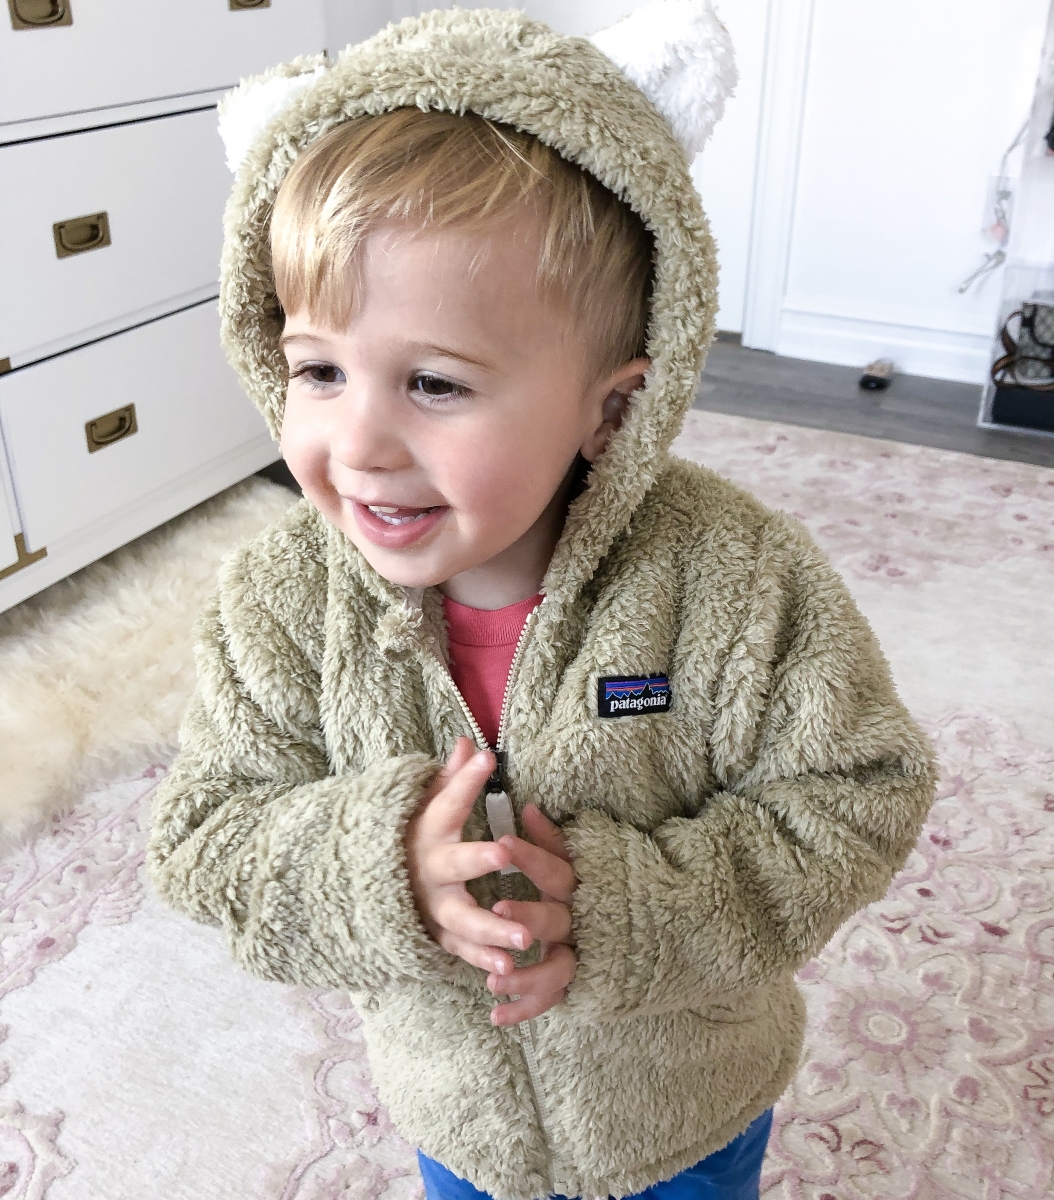 NSALE 2019 Toddler Patagonia, Nordstrom Anniversary Sale 2019 baby items, emily gemma